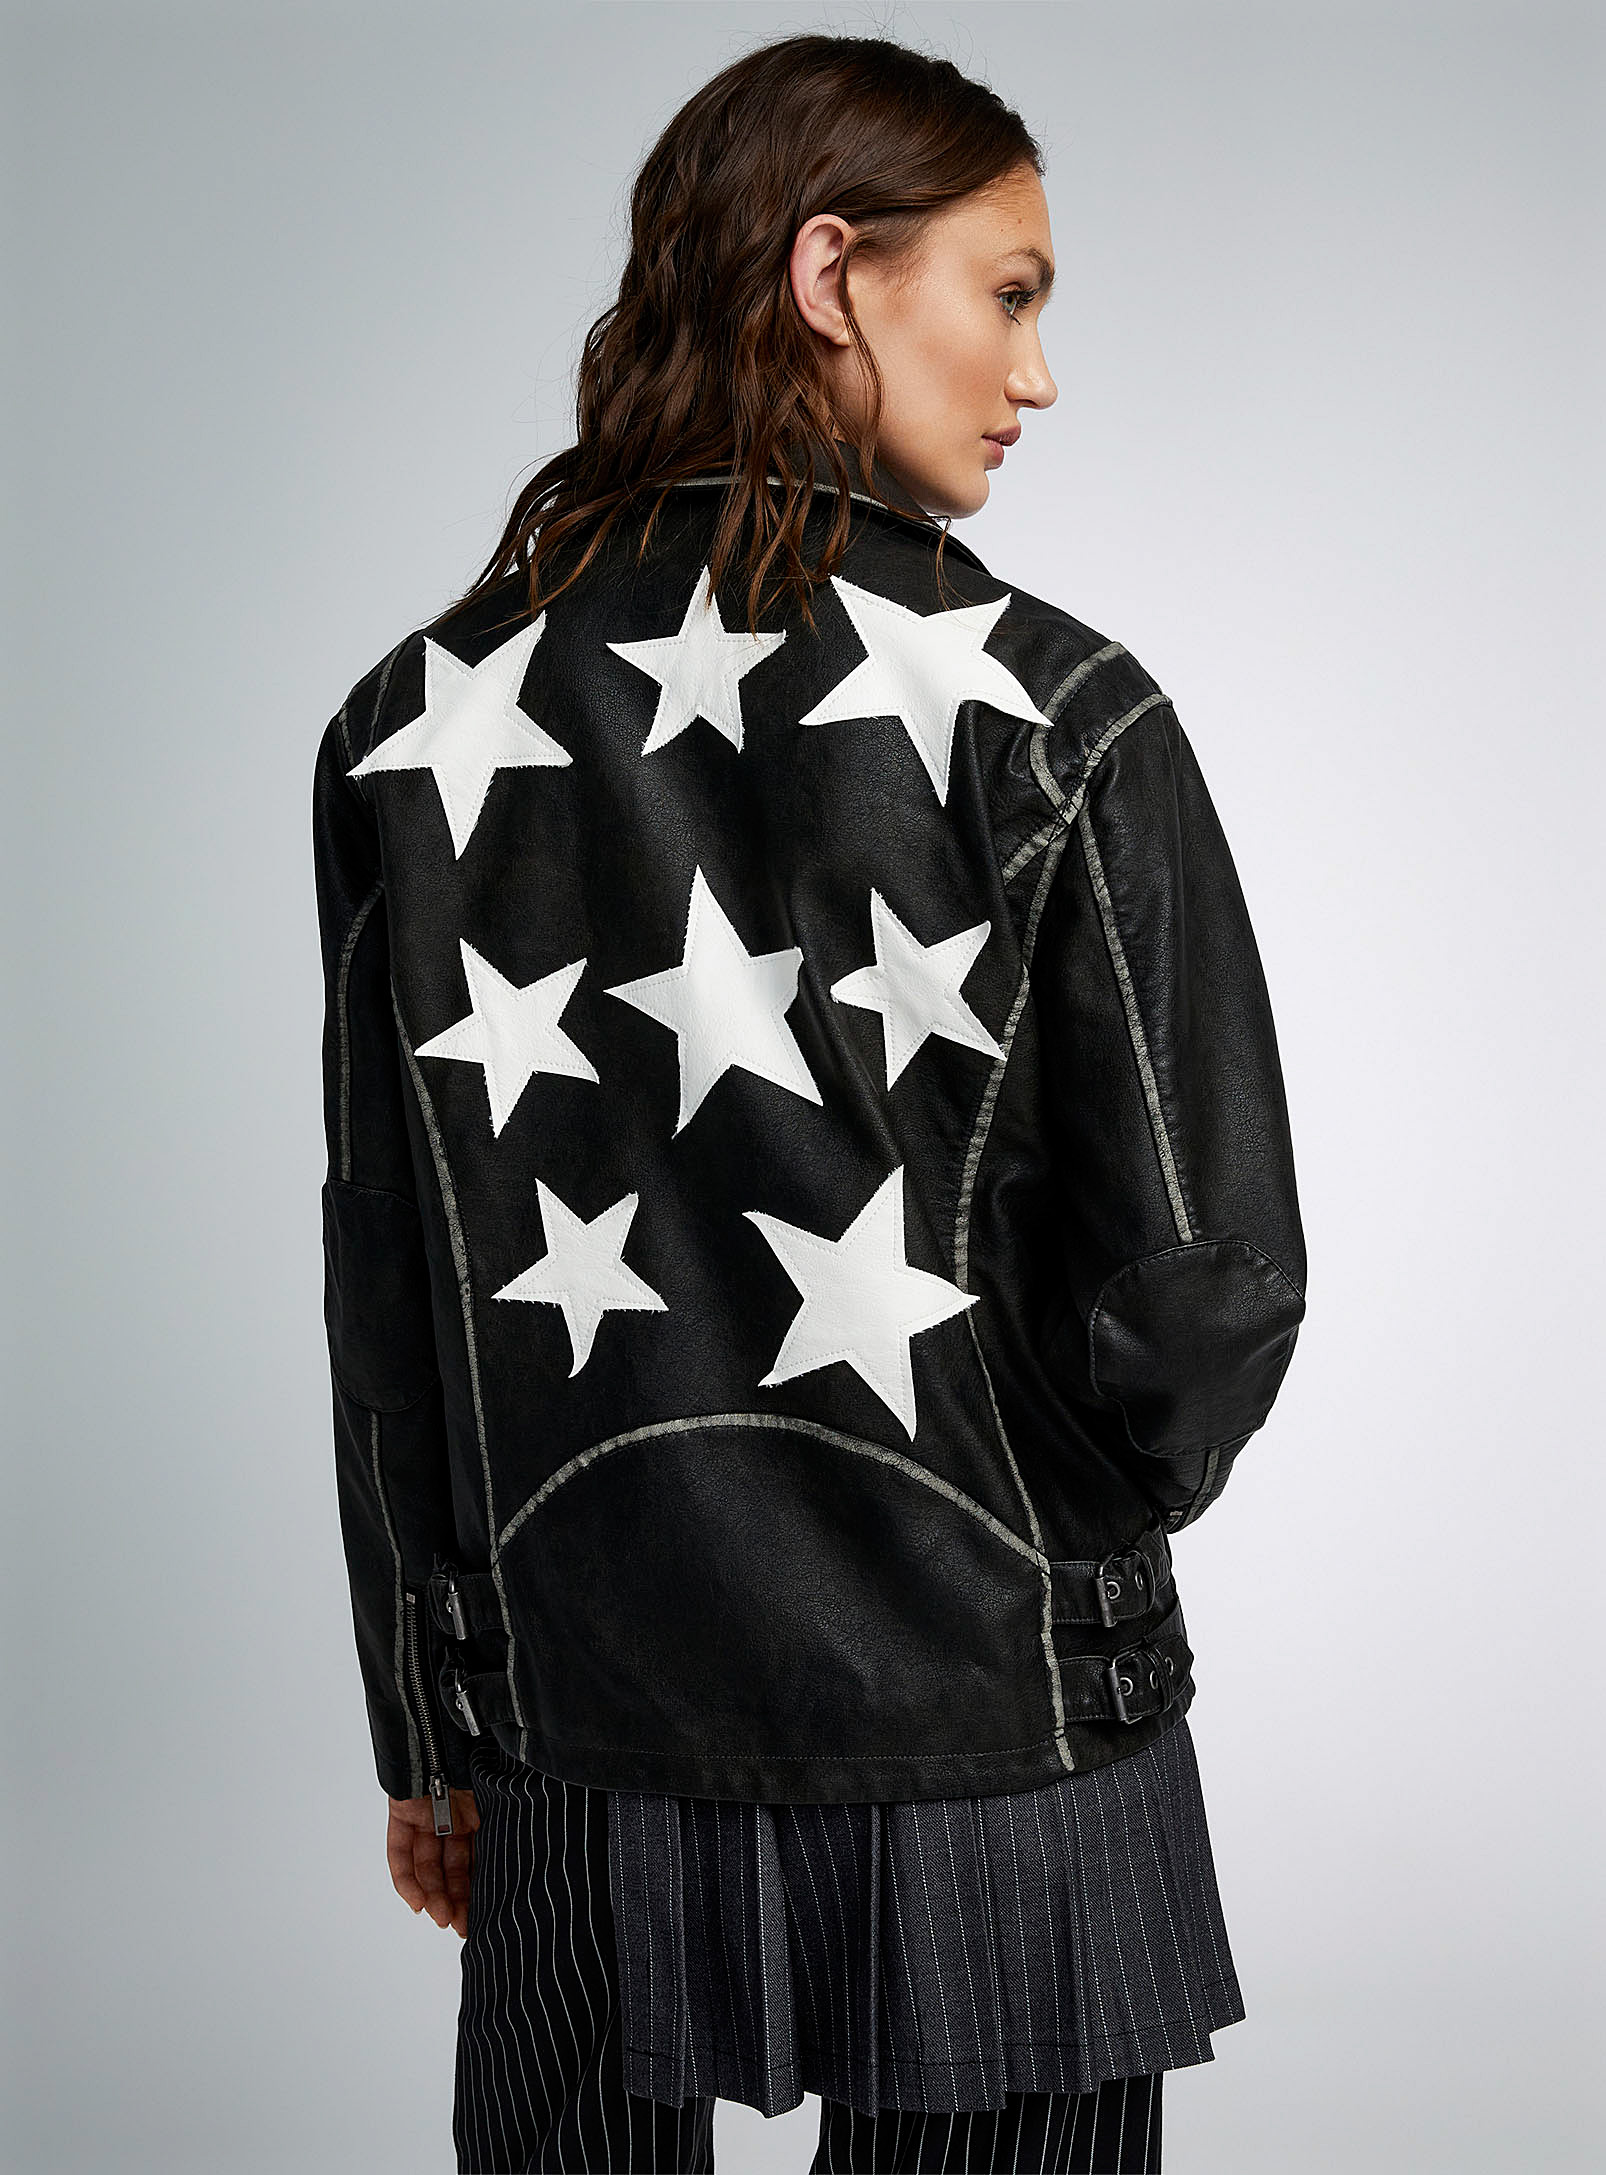 Twik - Women's Star patches faux-leather jacket